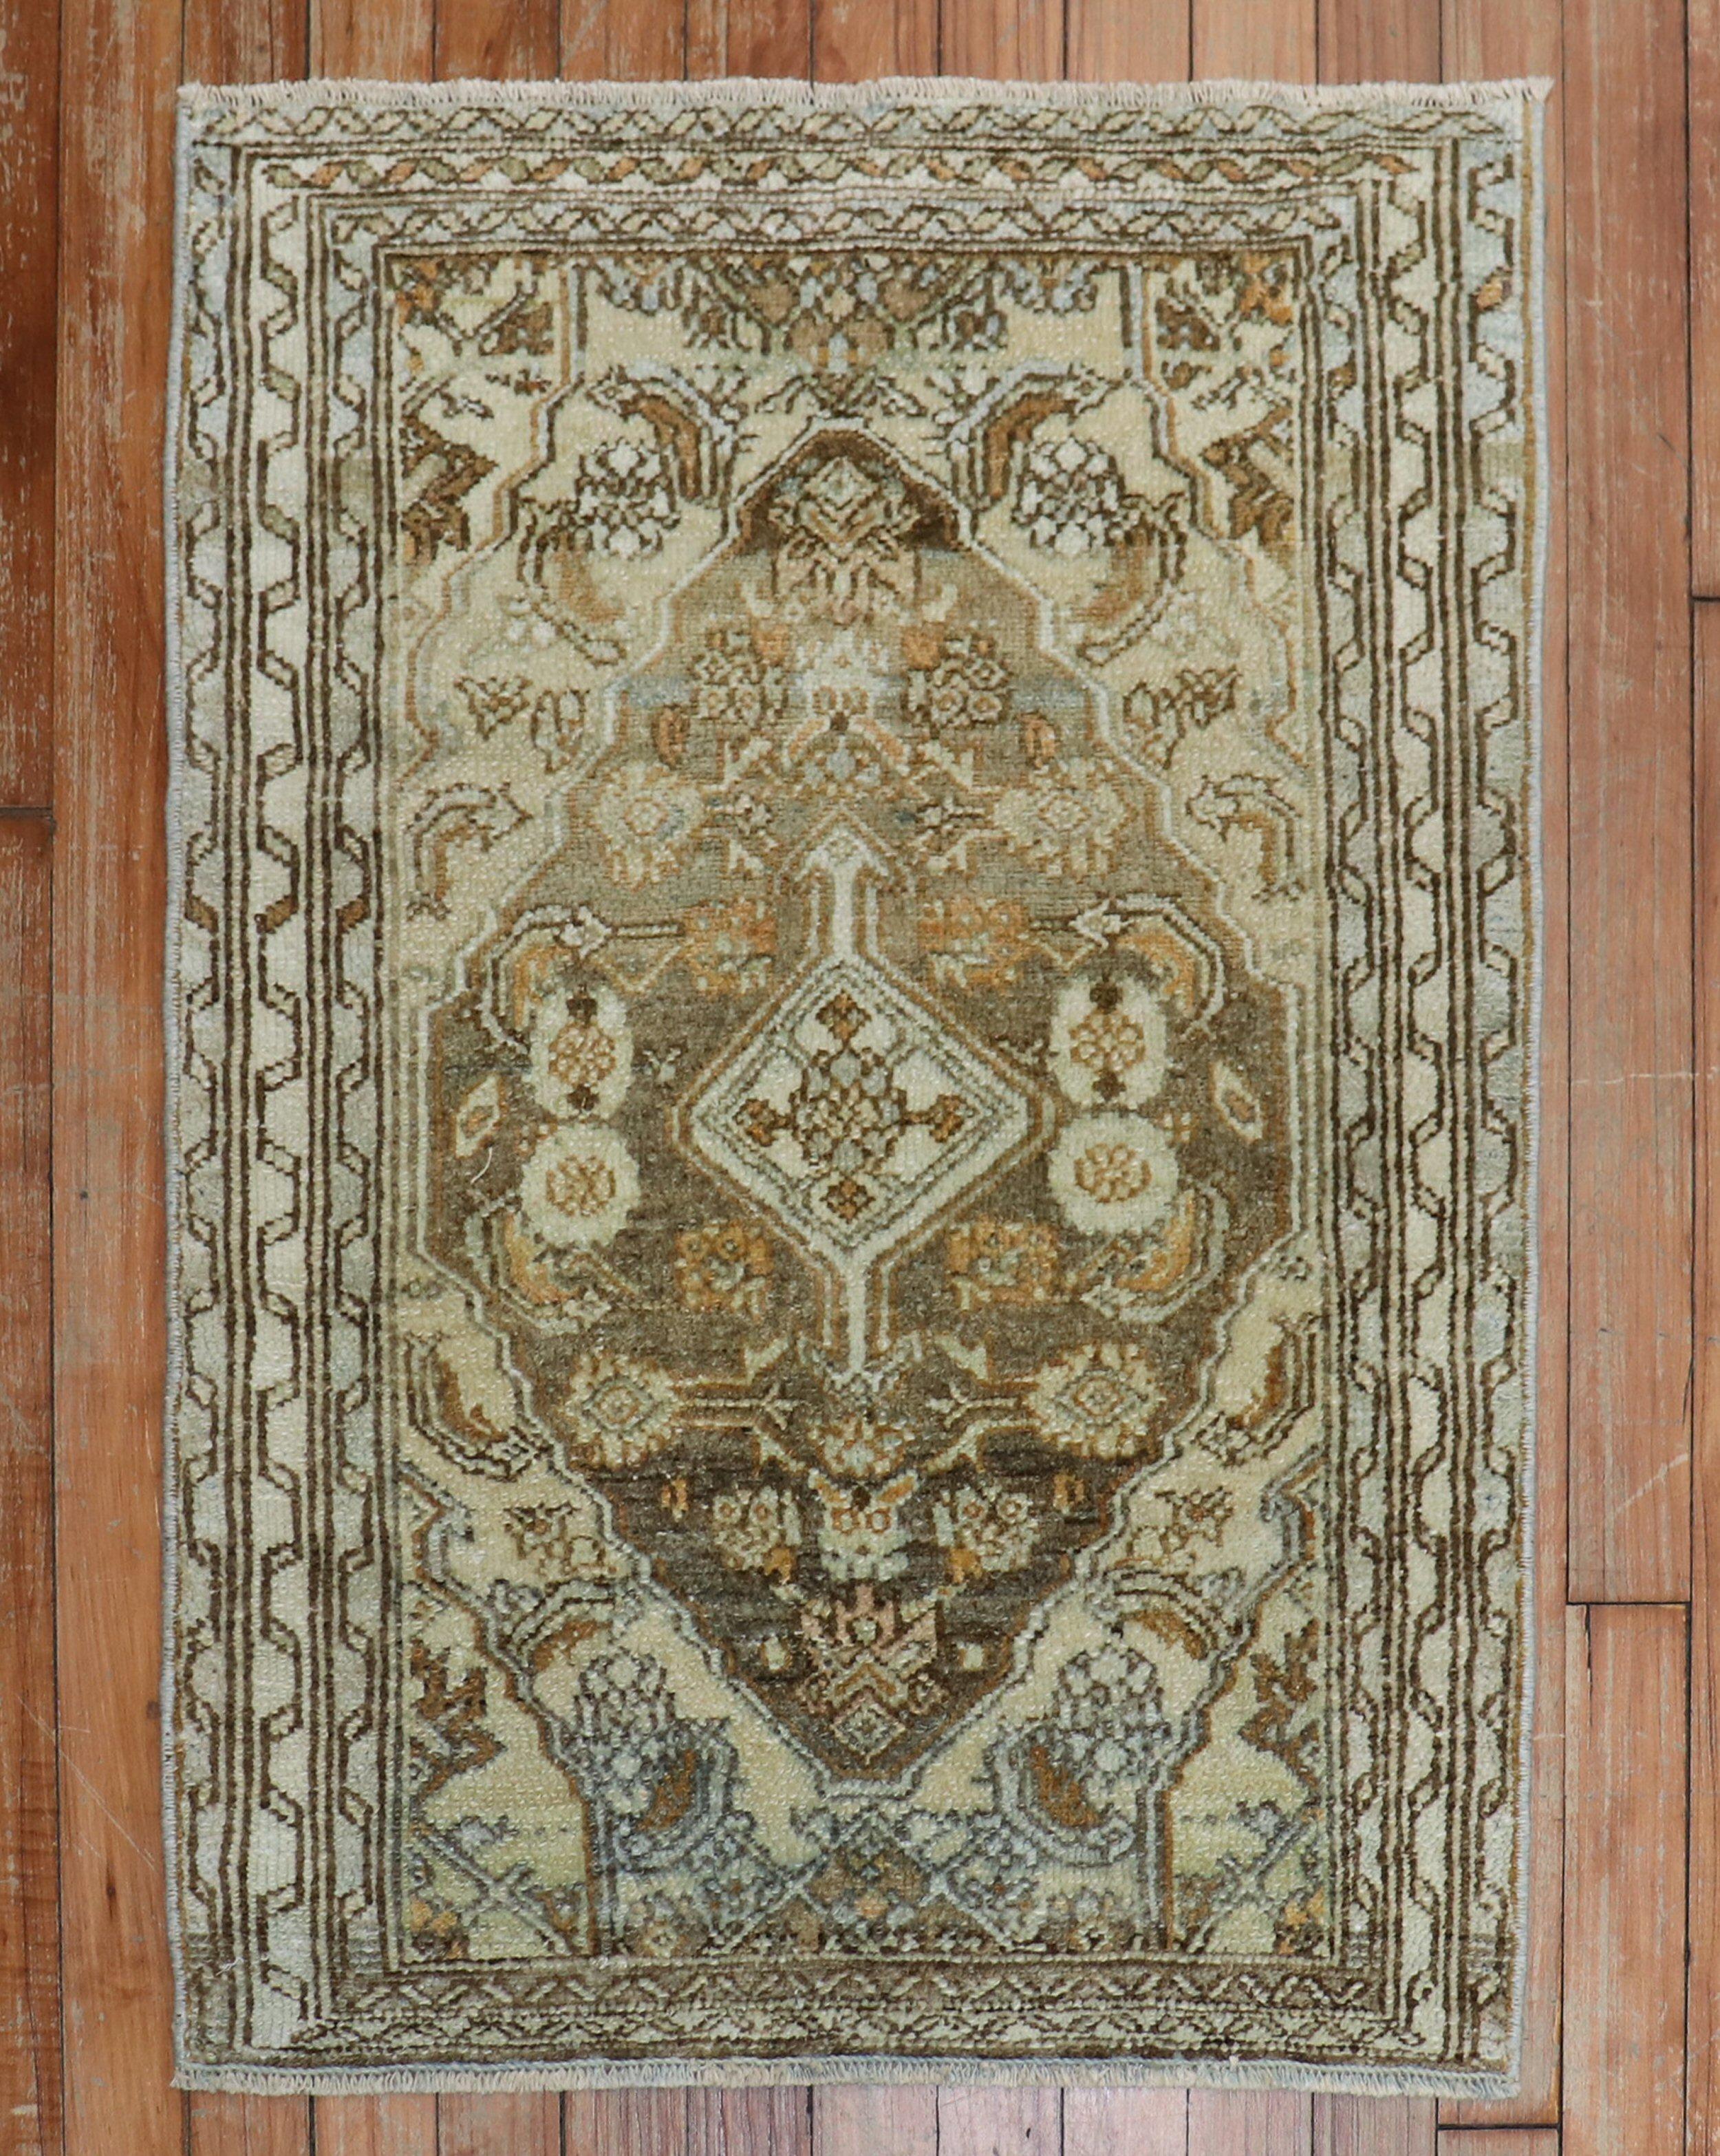 an early 20th Century Persian Malayer mini square-size rug

2'1'' x 2'9''